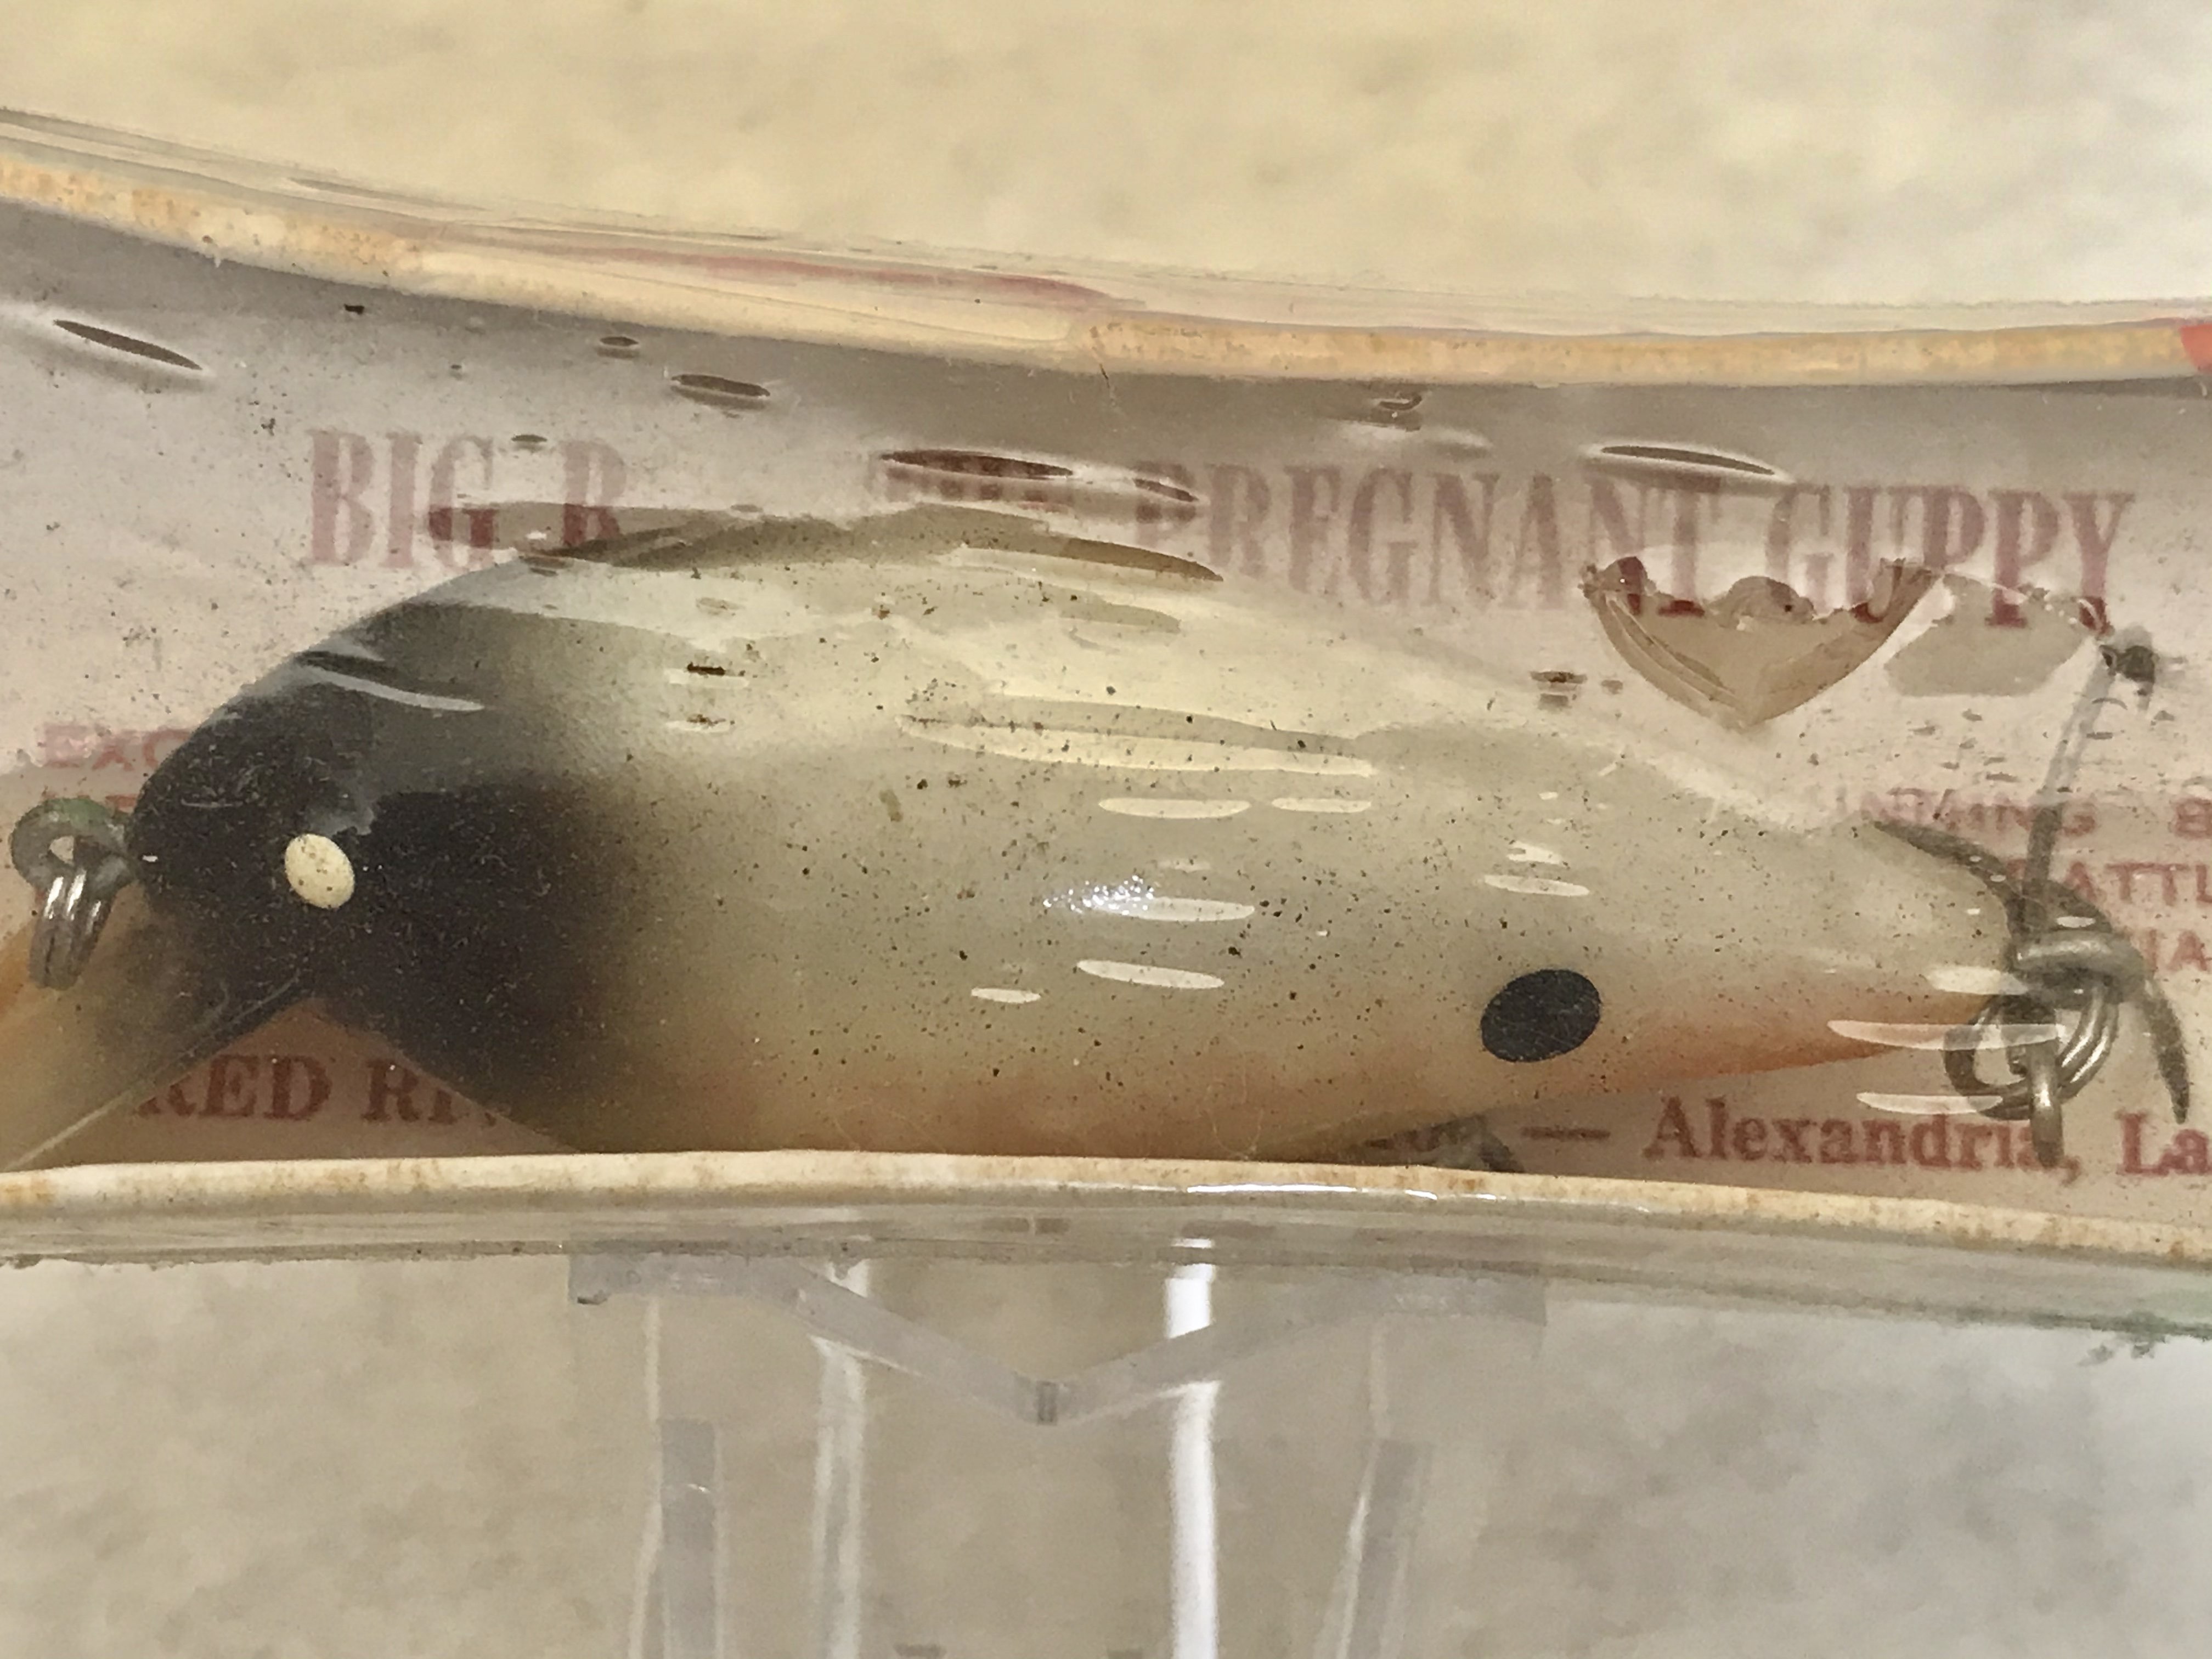 Red River Lures,”Big-R Pregnant Guppy“NIB papers